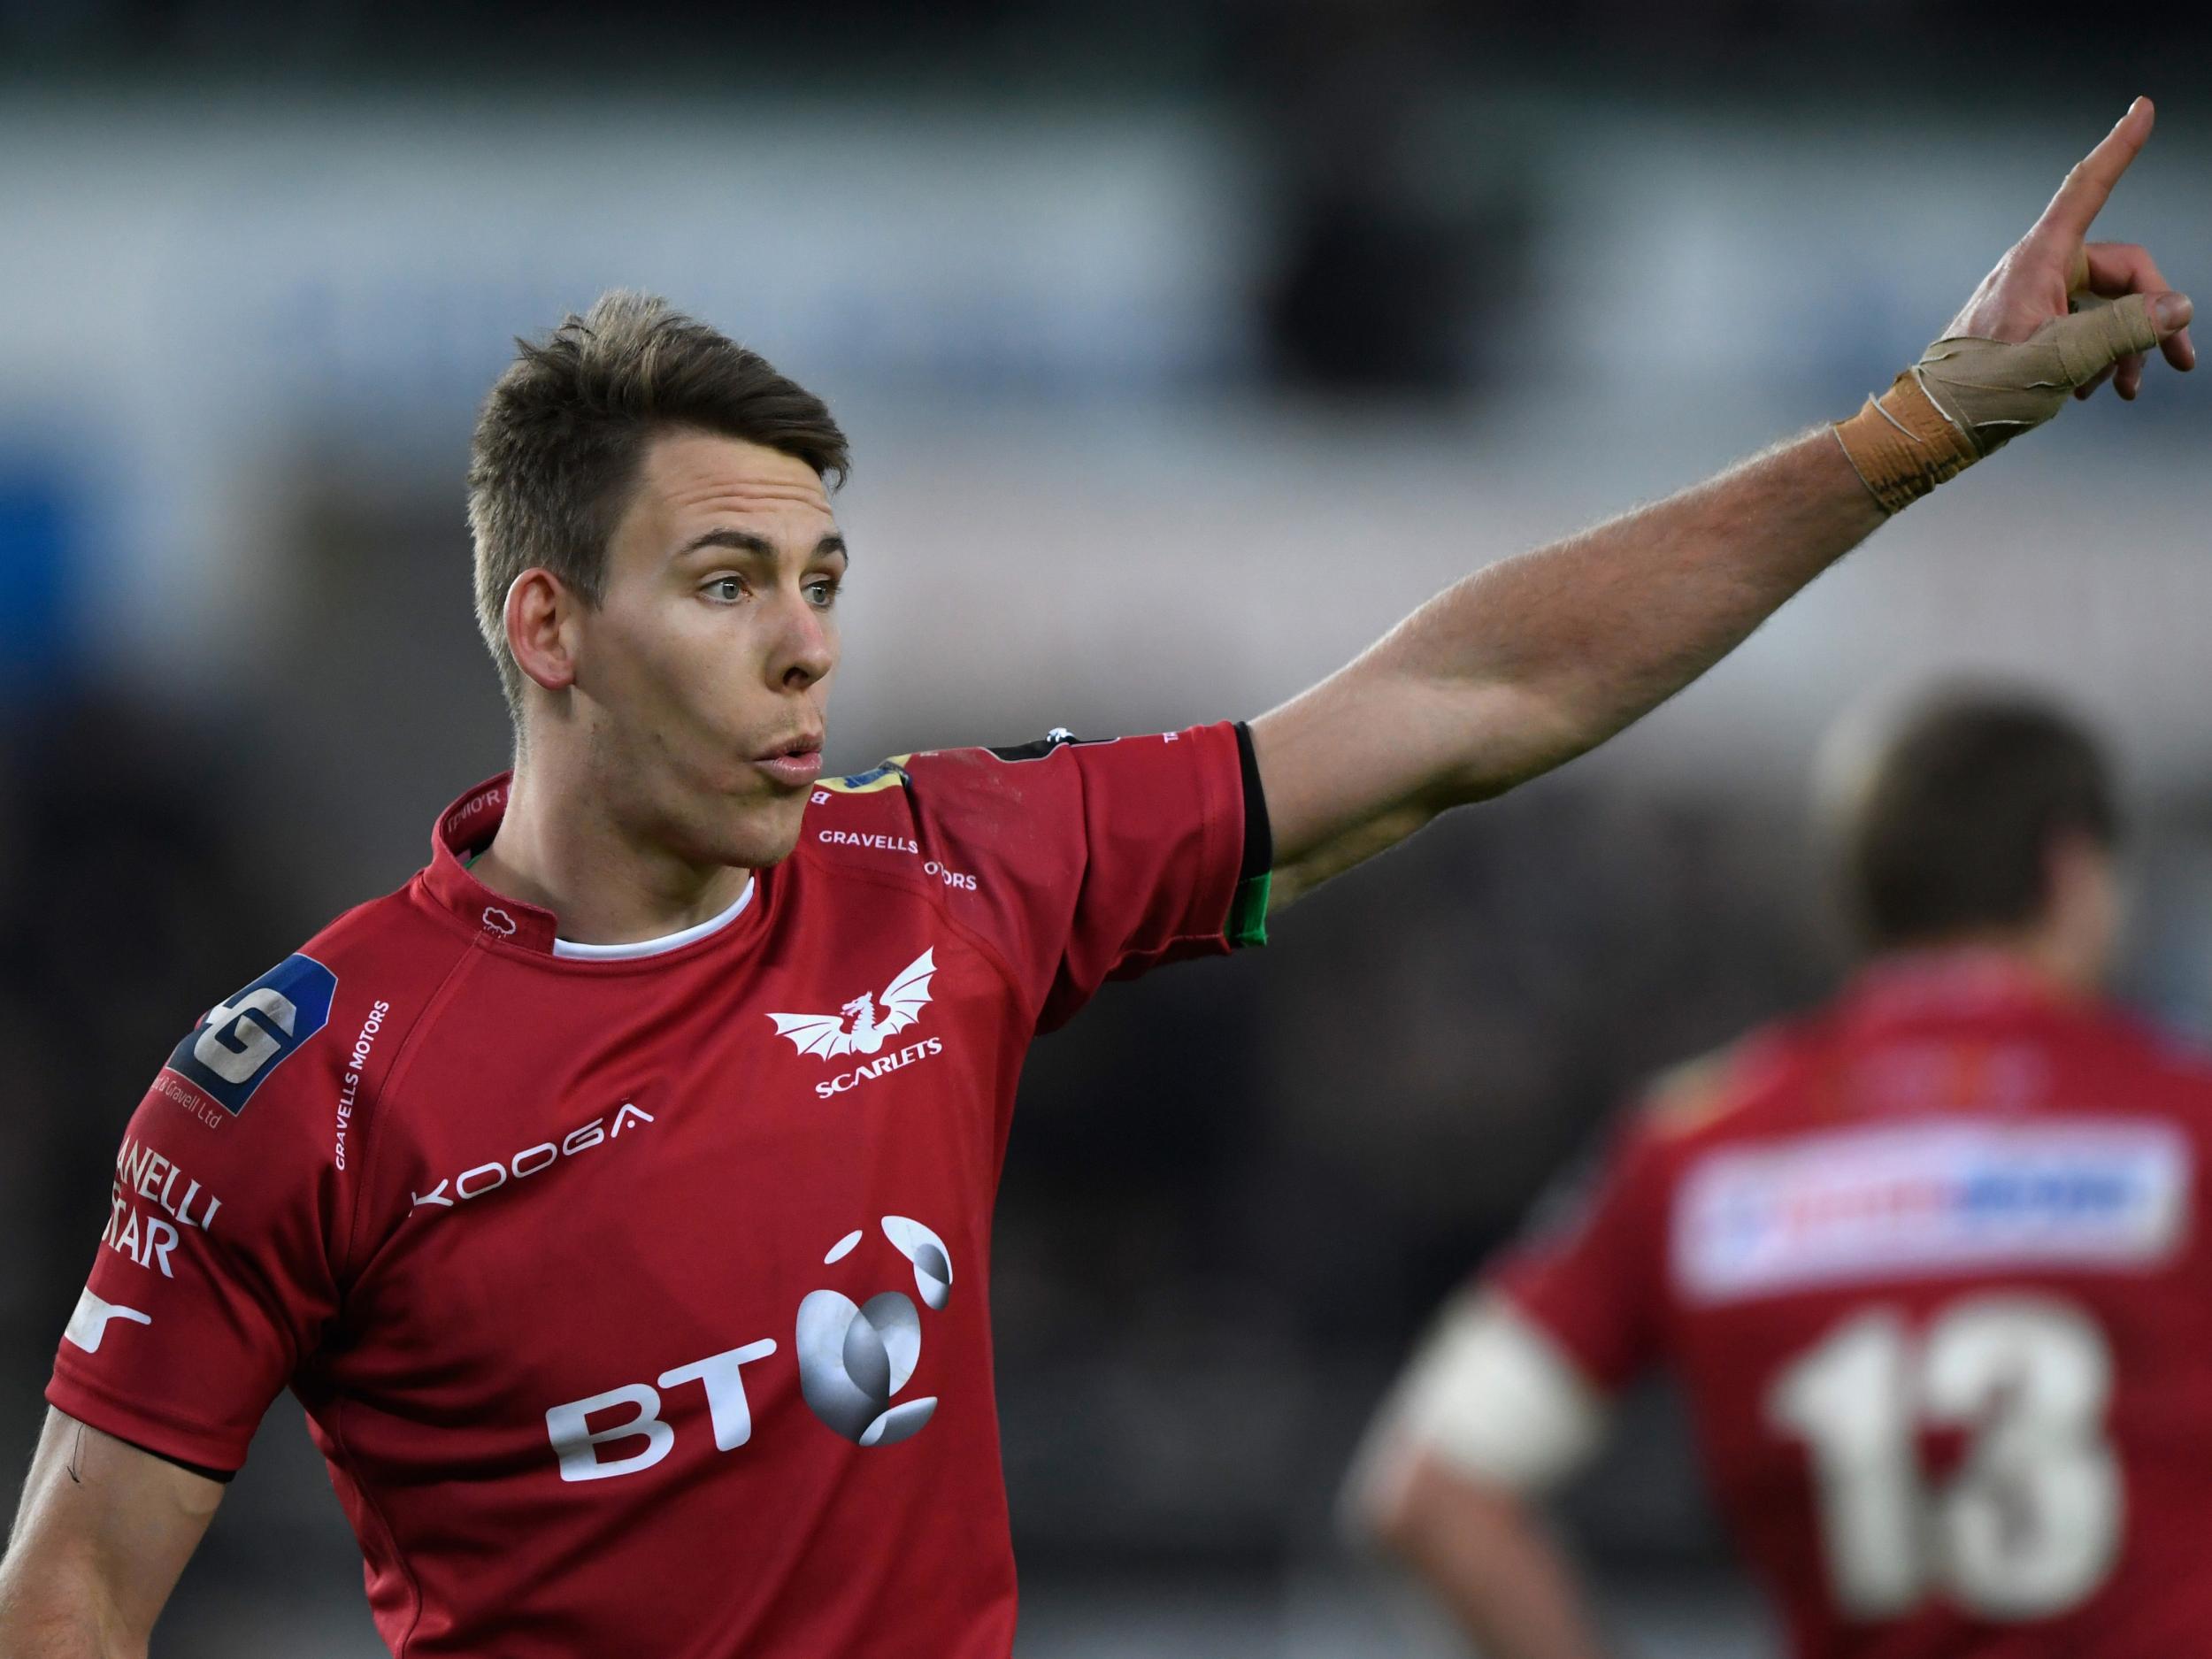 Williams has made more than 100 appearances for Scarlets and 38 for Wales